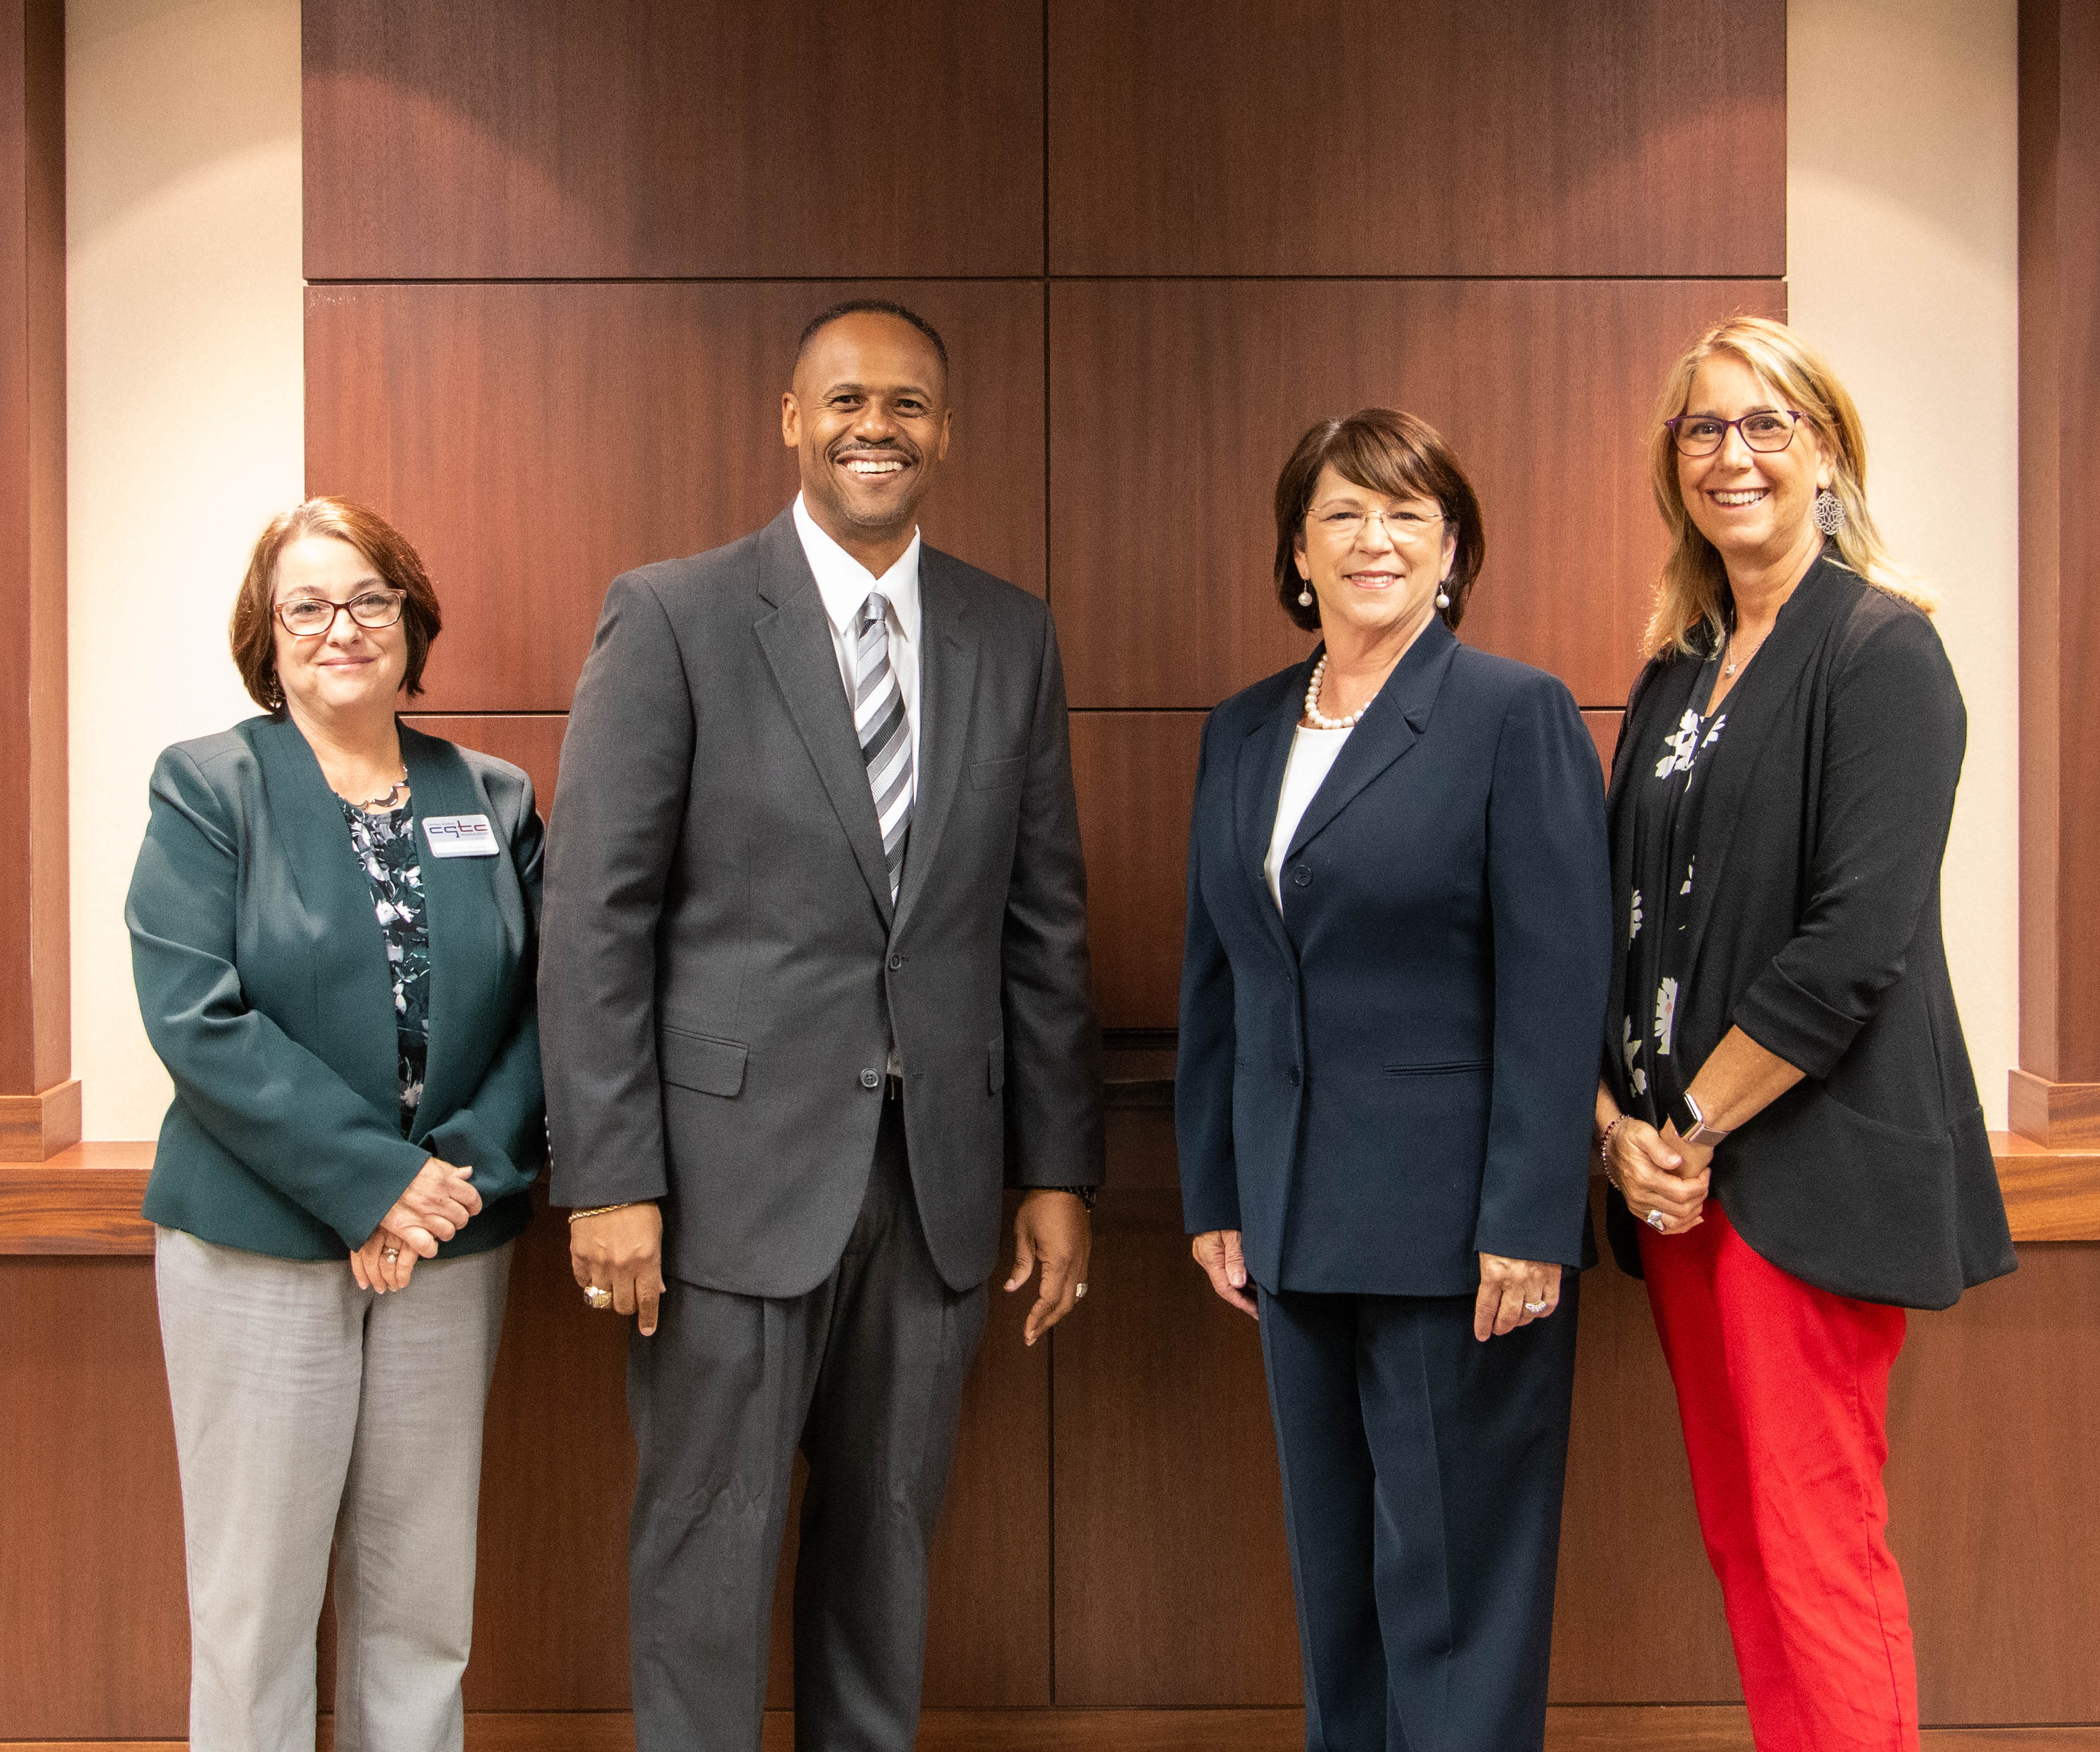 Central Georgia Technical College’s vice president of Academic Affairs, Dr. Amy Holloway and president, Dr. Ivan H. Allen, join Wesleyan College’s president, Dr. Vivia L. Fowler, and provost, Dr. Melody Blake following a historic first articulation agreement signing between the two institutions. 